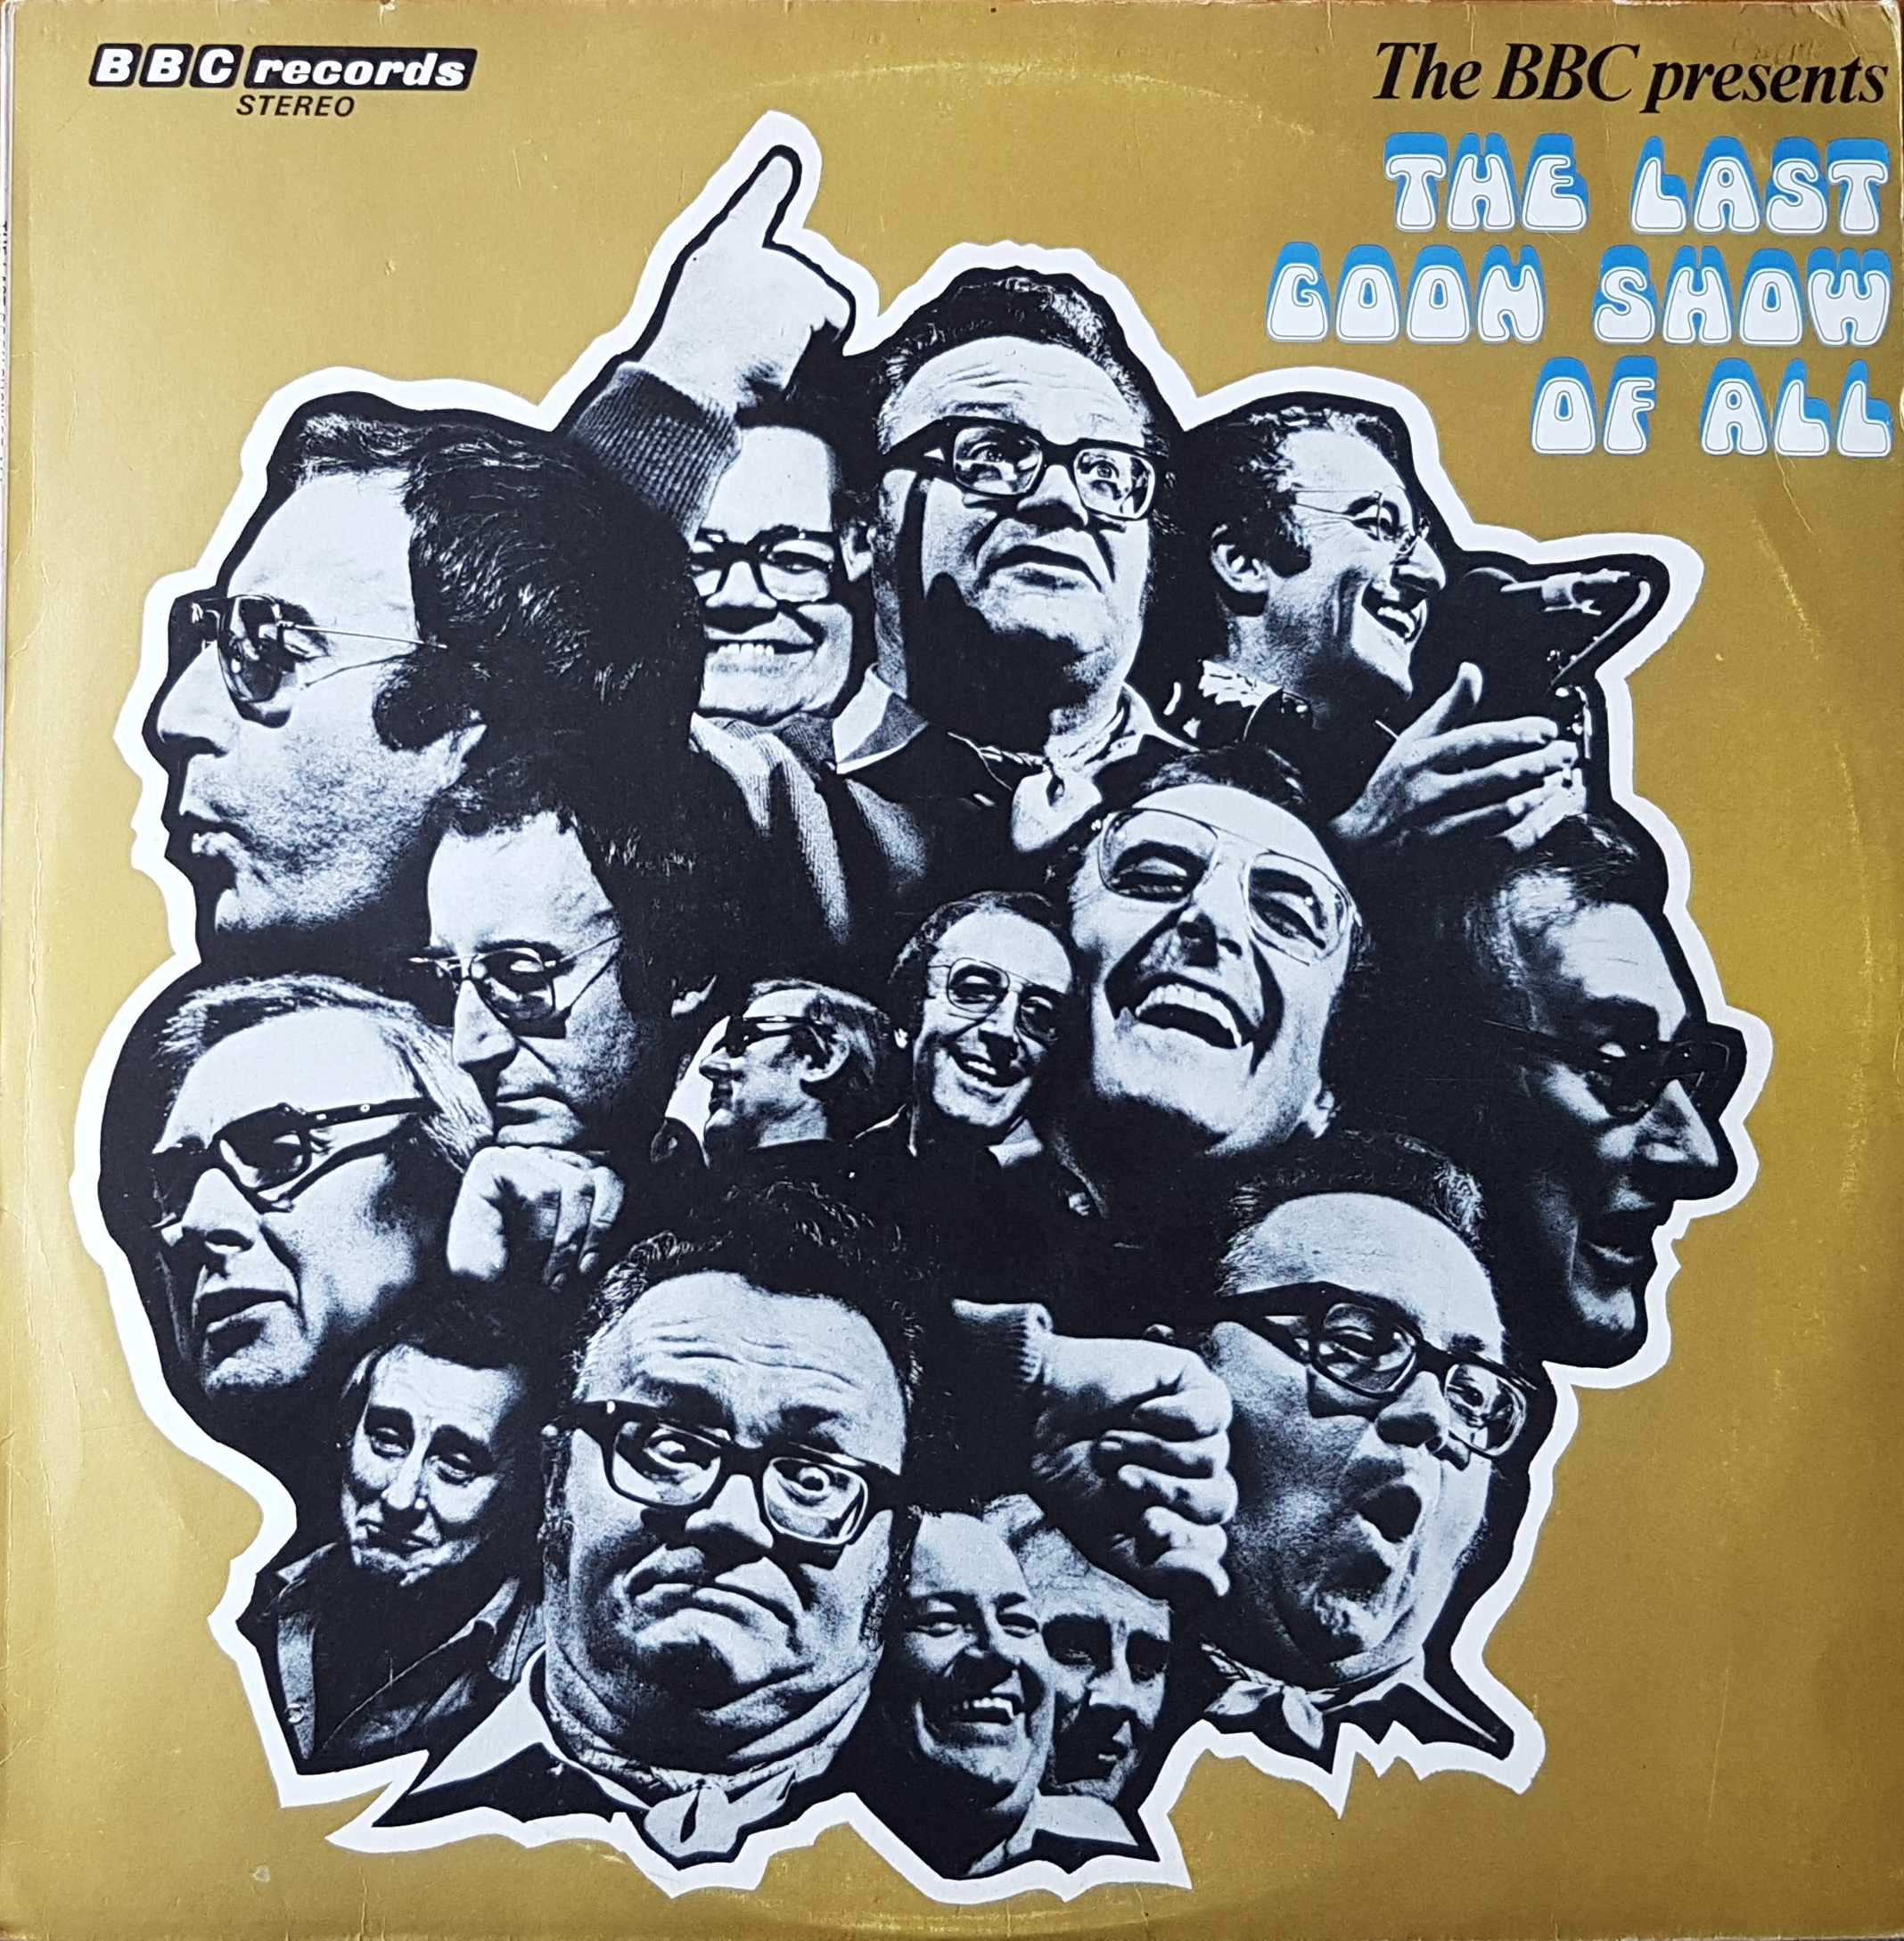 Picture of REB 142 The last Goon show of all by artist Spike Milligan from the BBC albums - Records and Tapes library